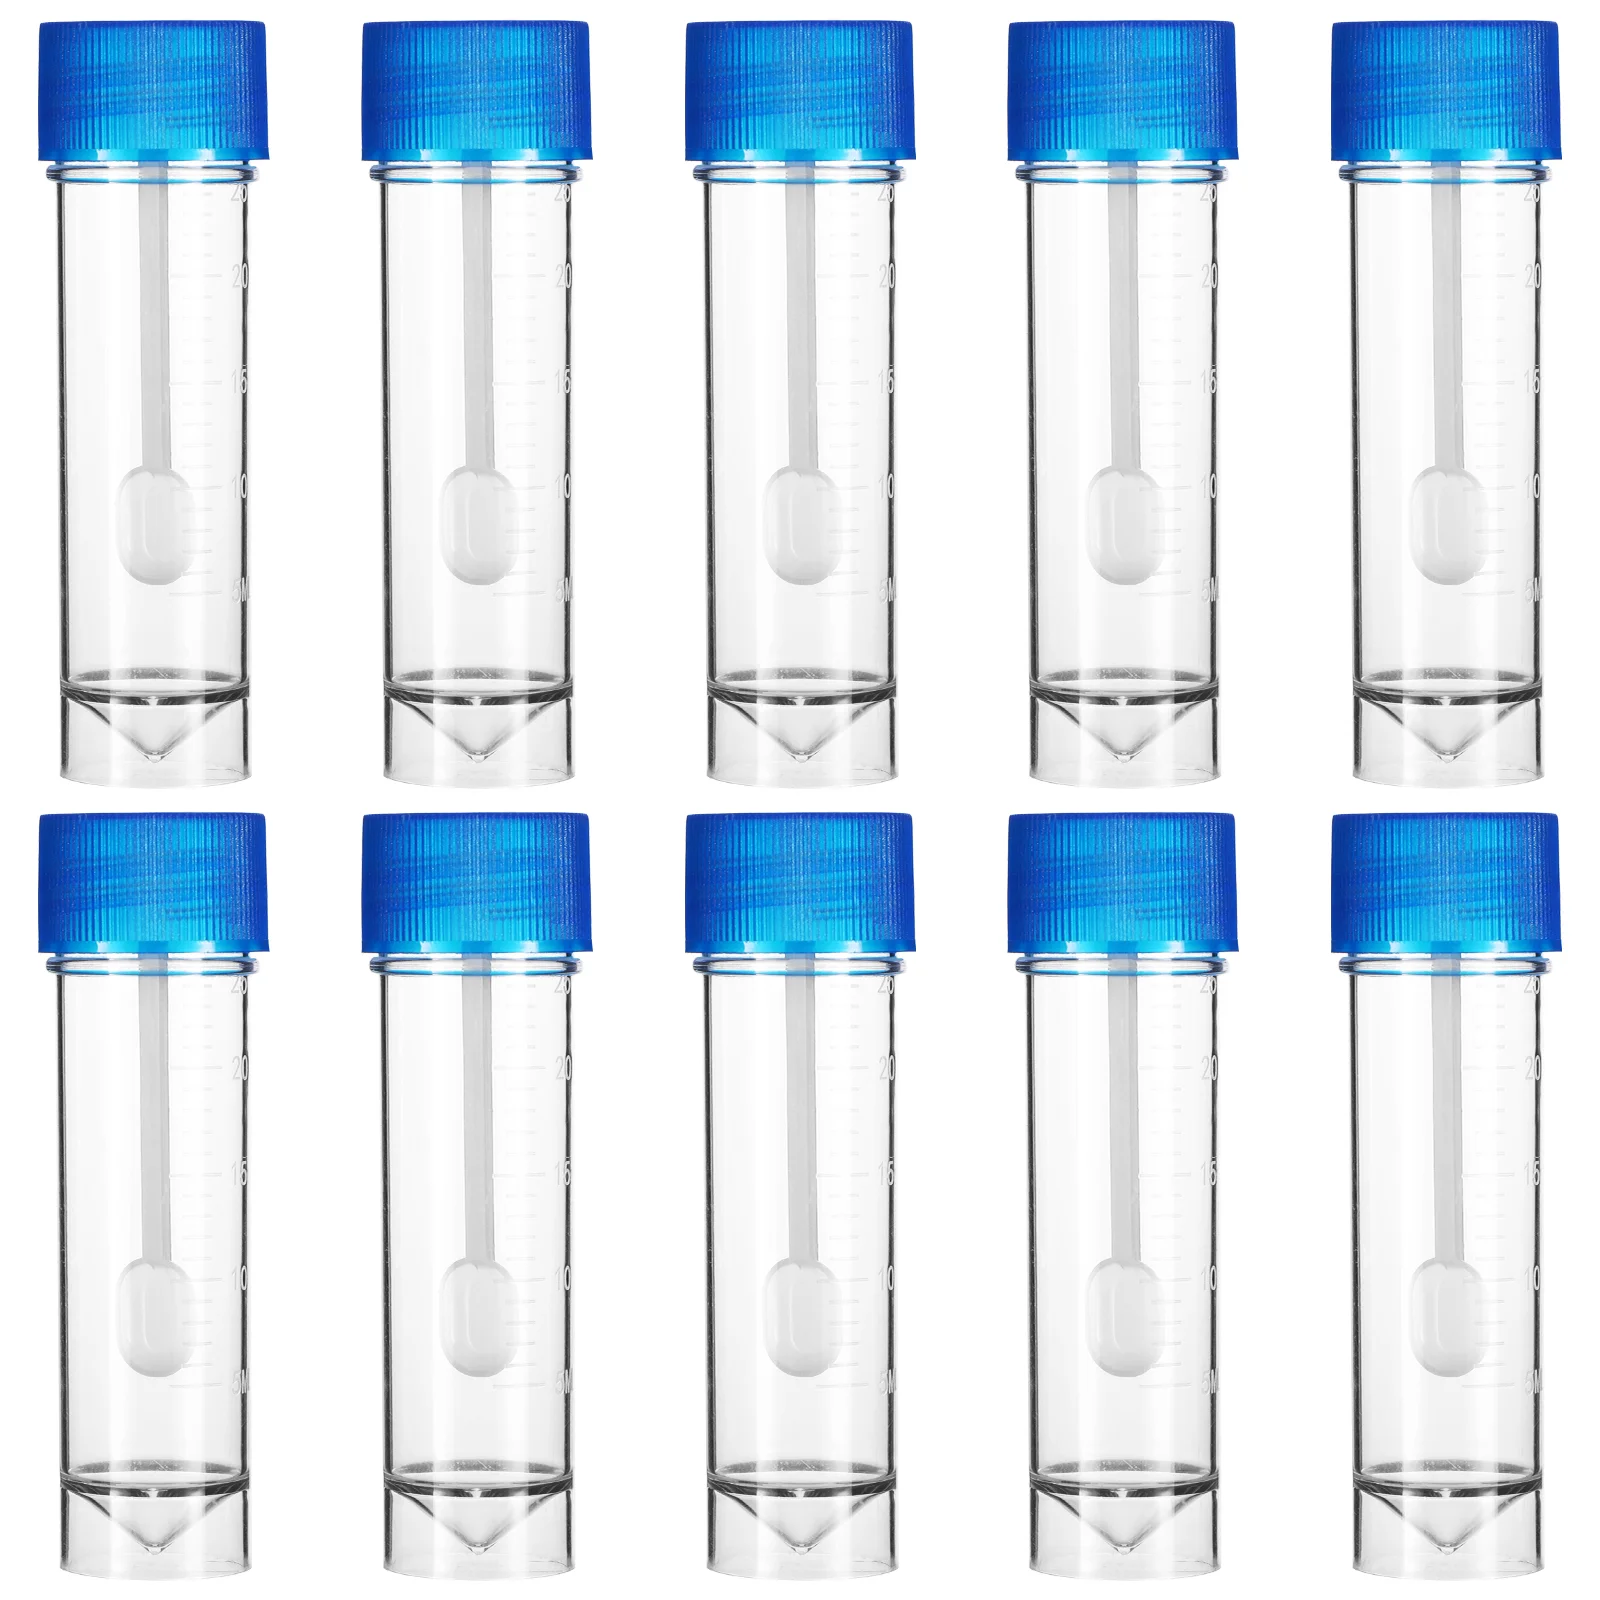 

10pcs Plastic Specimen Cups Disposable Stool Sample Collection Cups Specimen Cups for Testing (25-30ML)